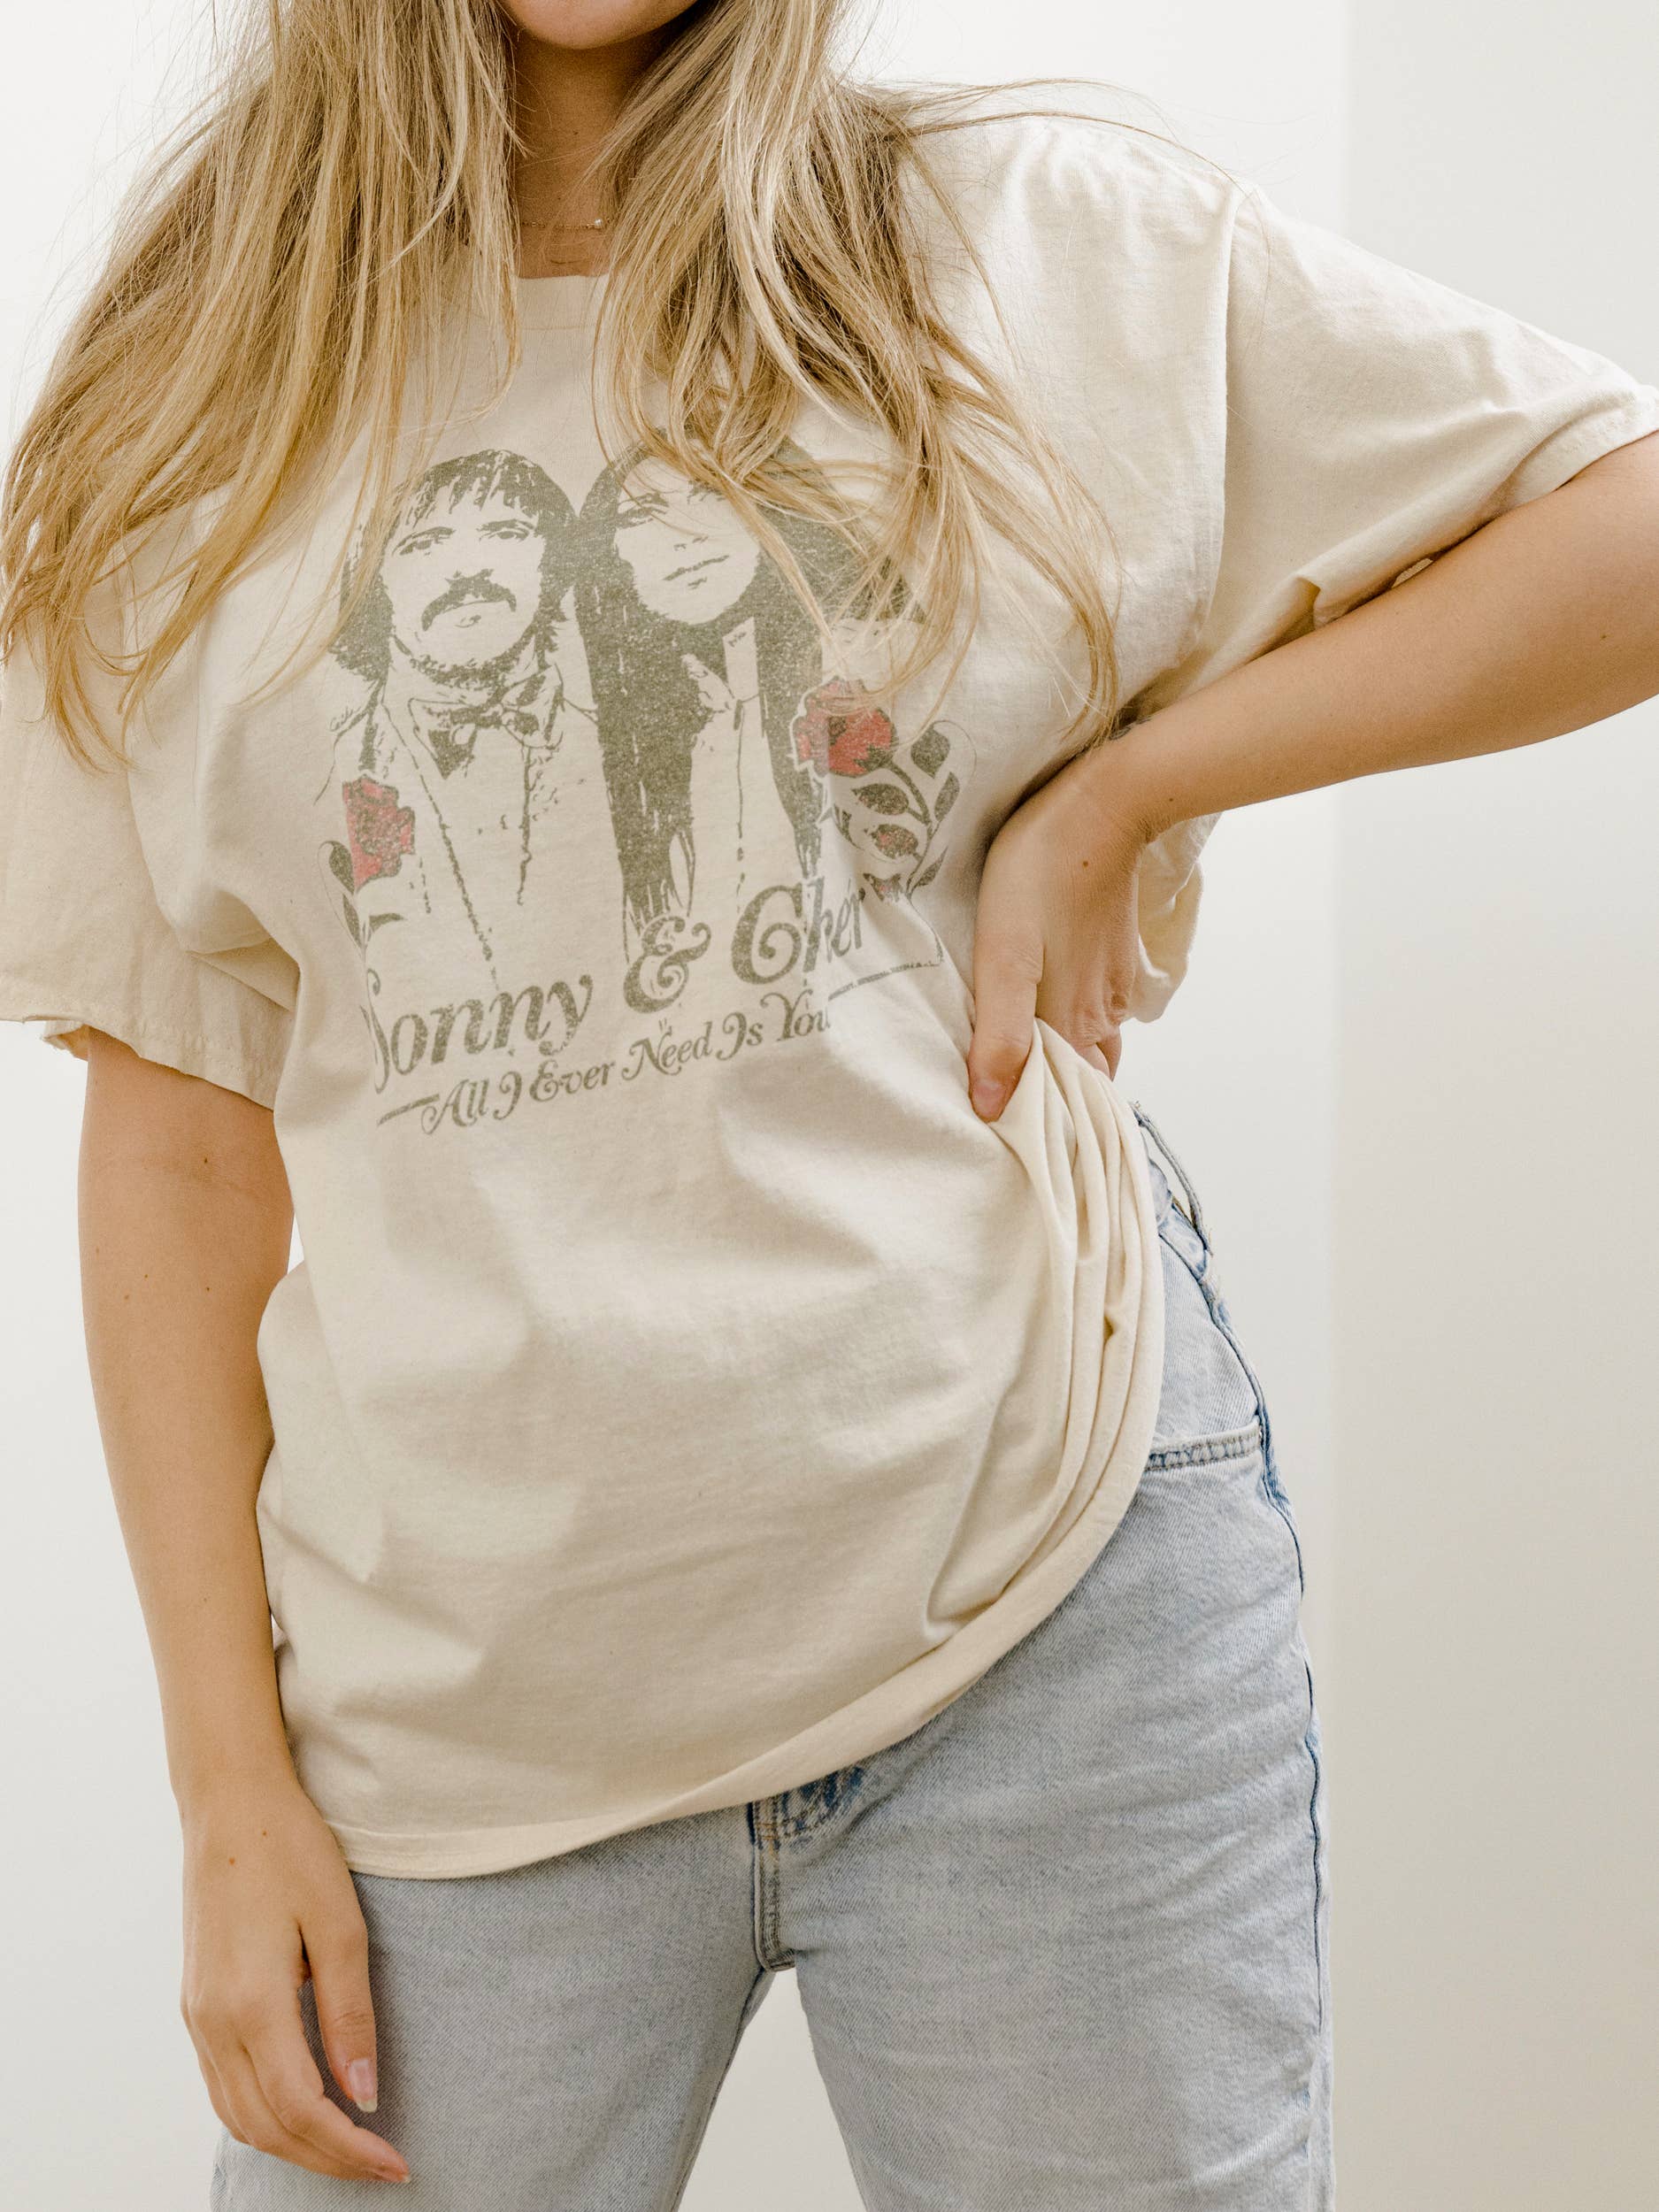 LivyLu - Sonny & Cher All I Need is Love Off White Thrifted Tee